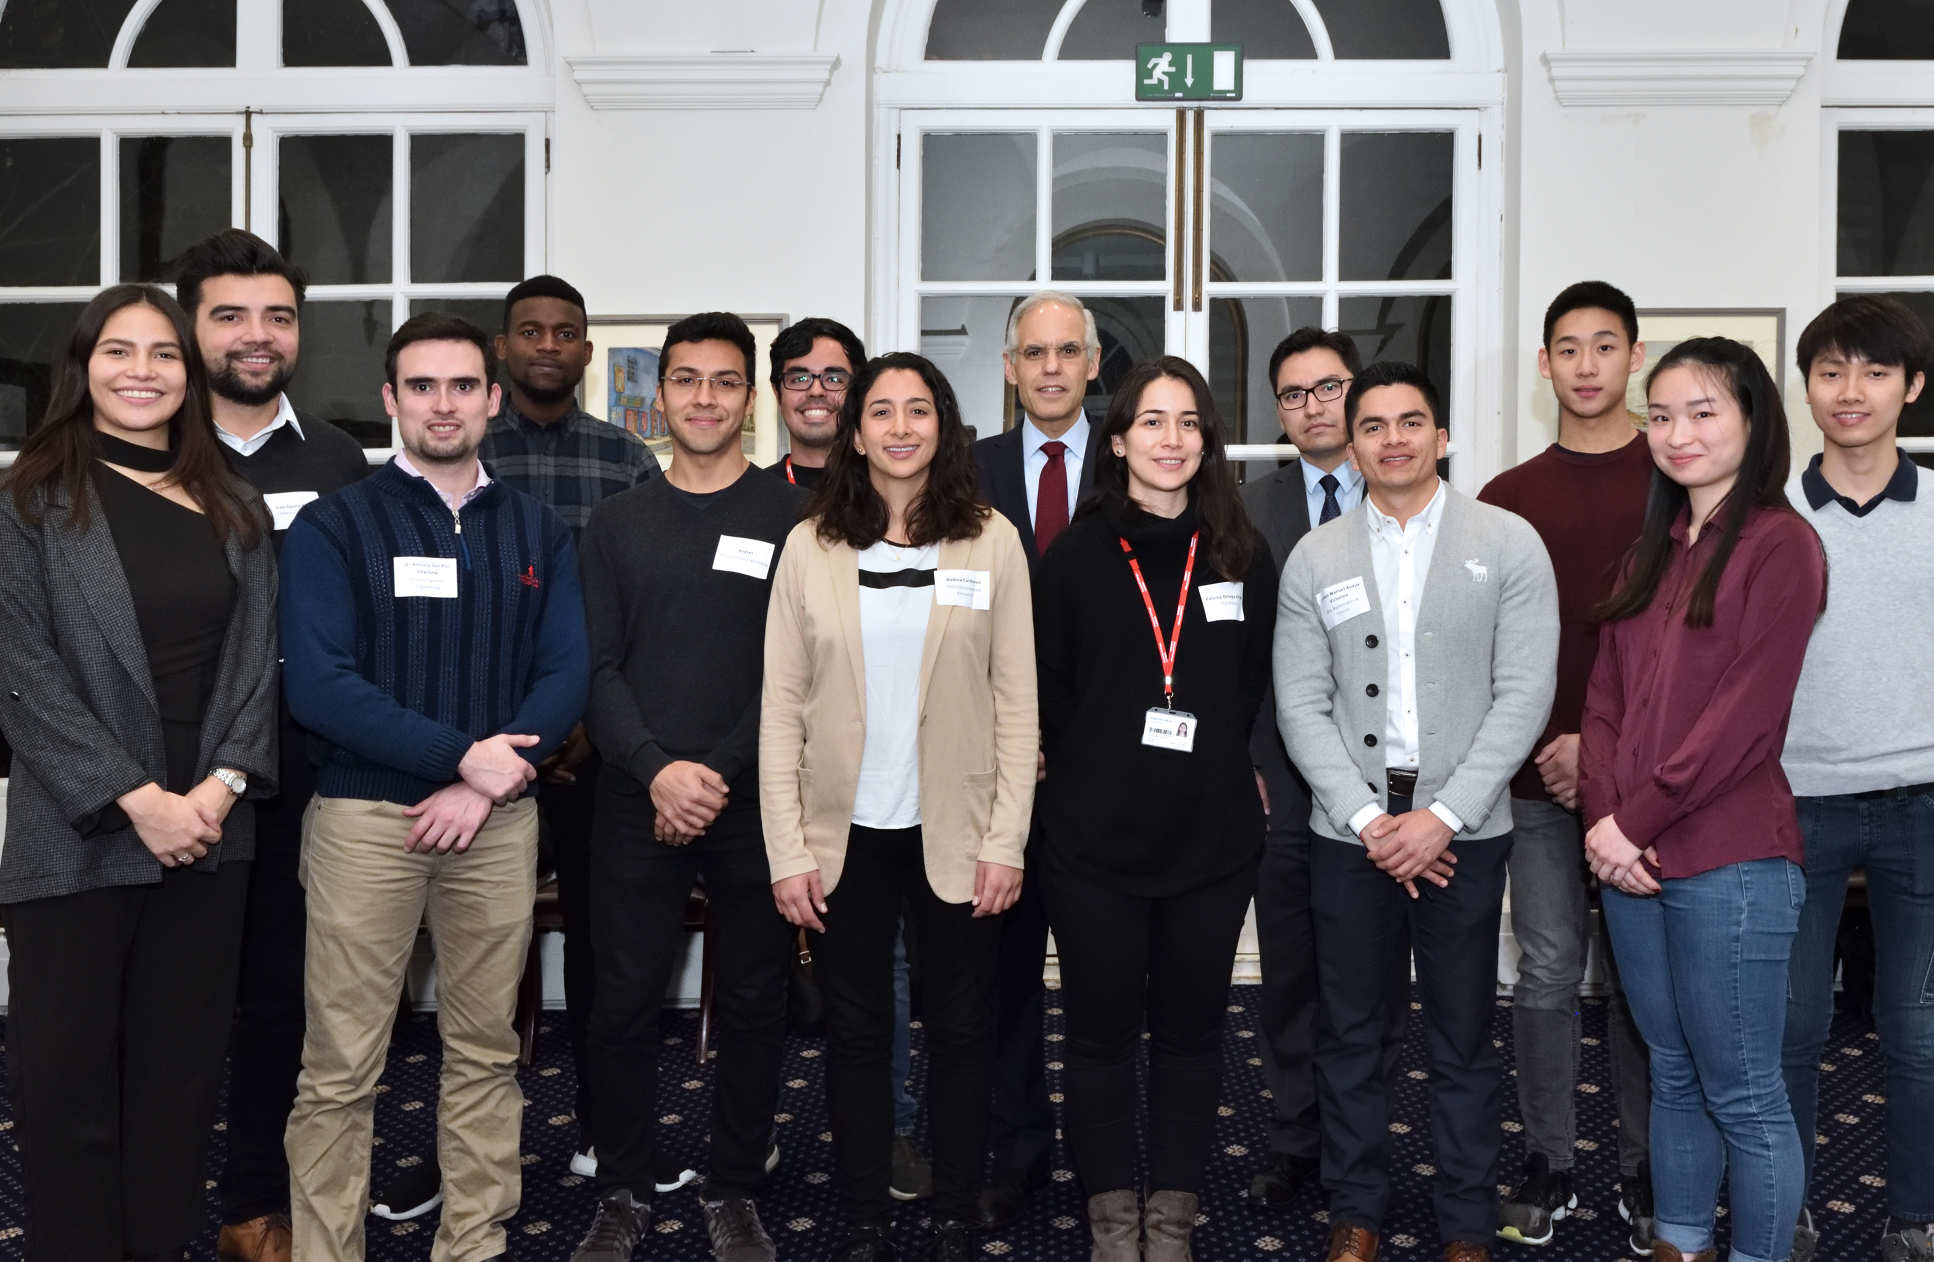 The Ambassador then met some of Imperial’s Mexican and chemical engineering students to discuss their research projects 